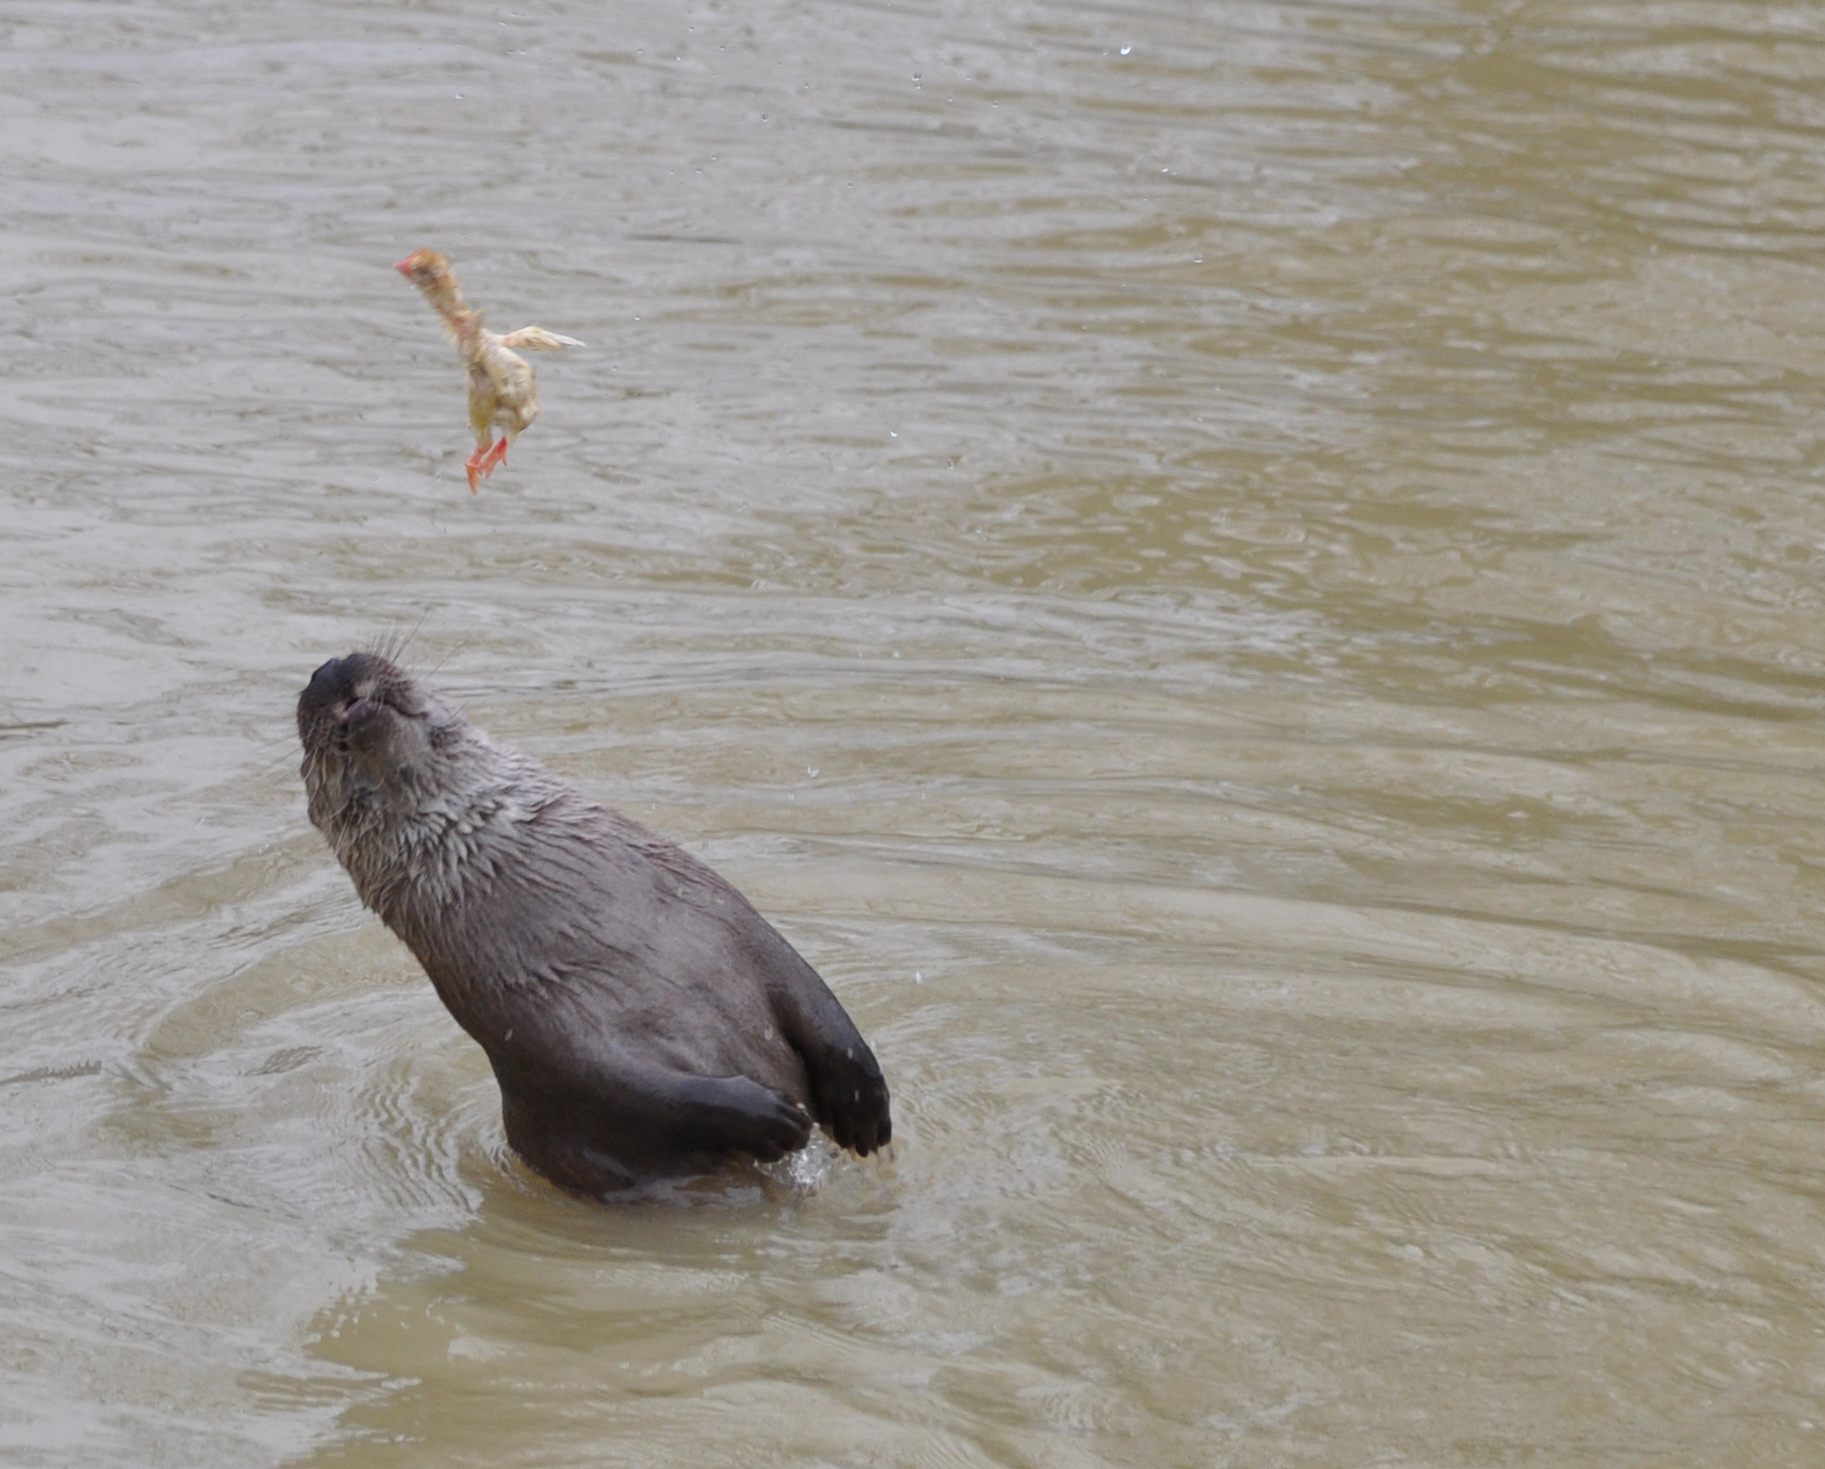 a sea otter wading in water next to another animal